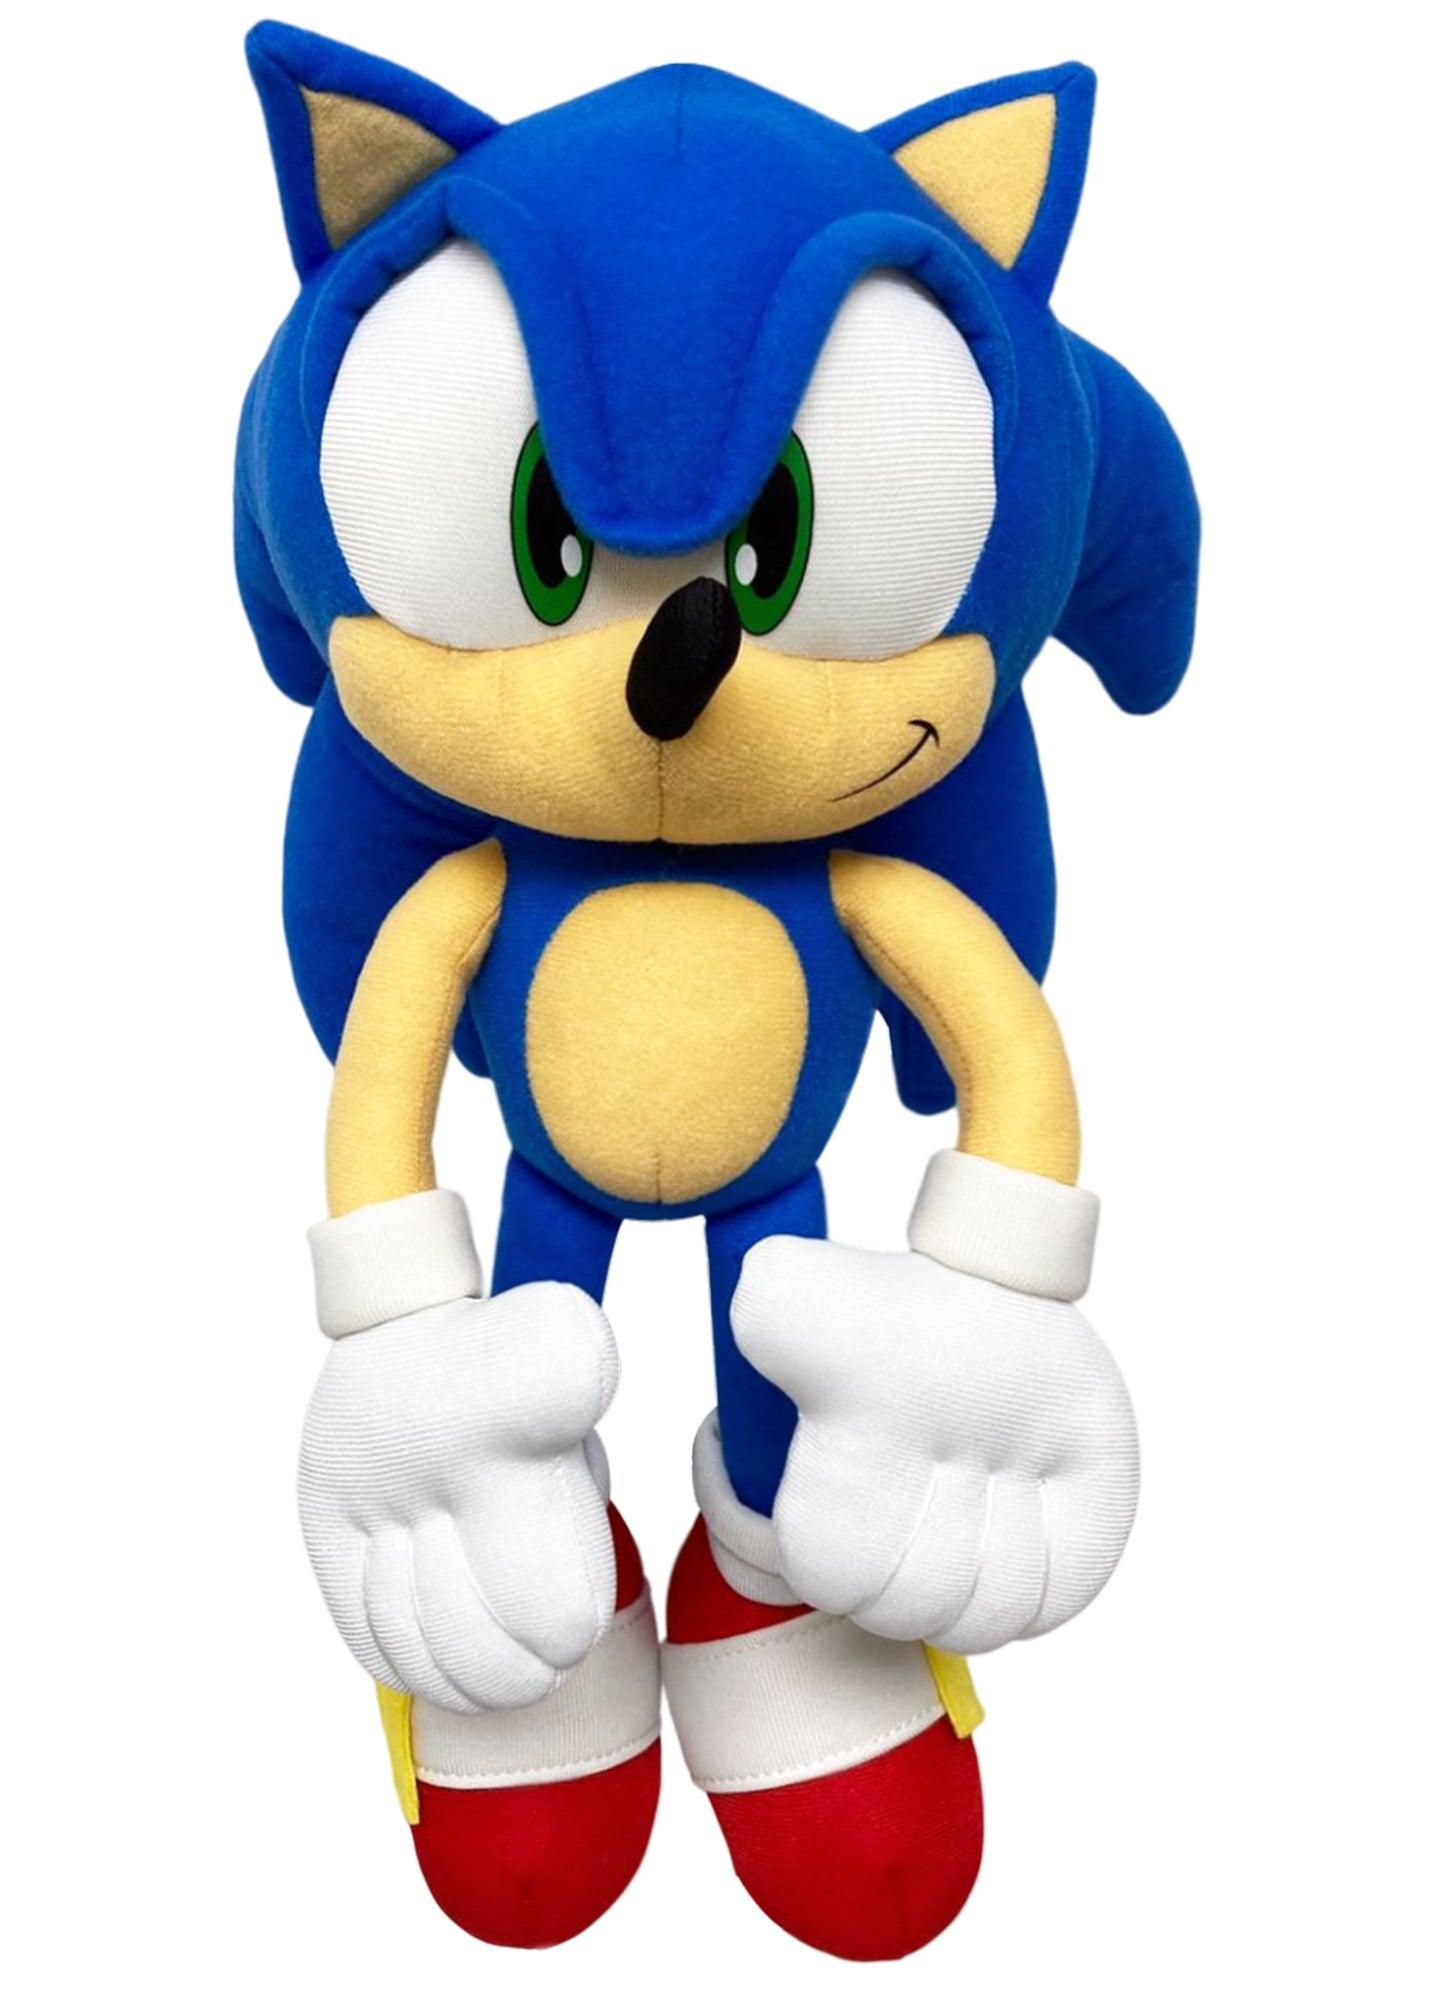 Great Eastern Entertainment Co. Sonic The Hedgehog 8 Inch Plush